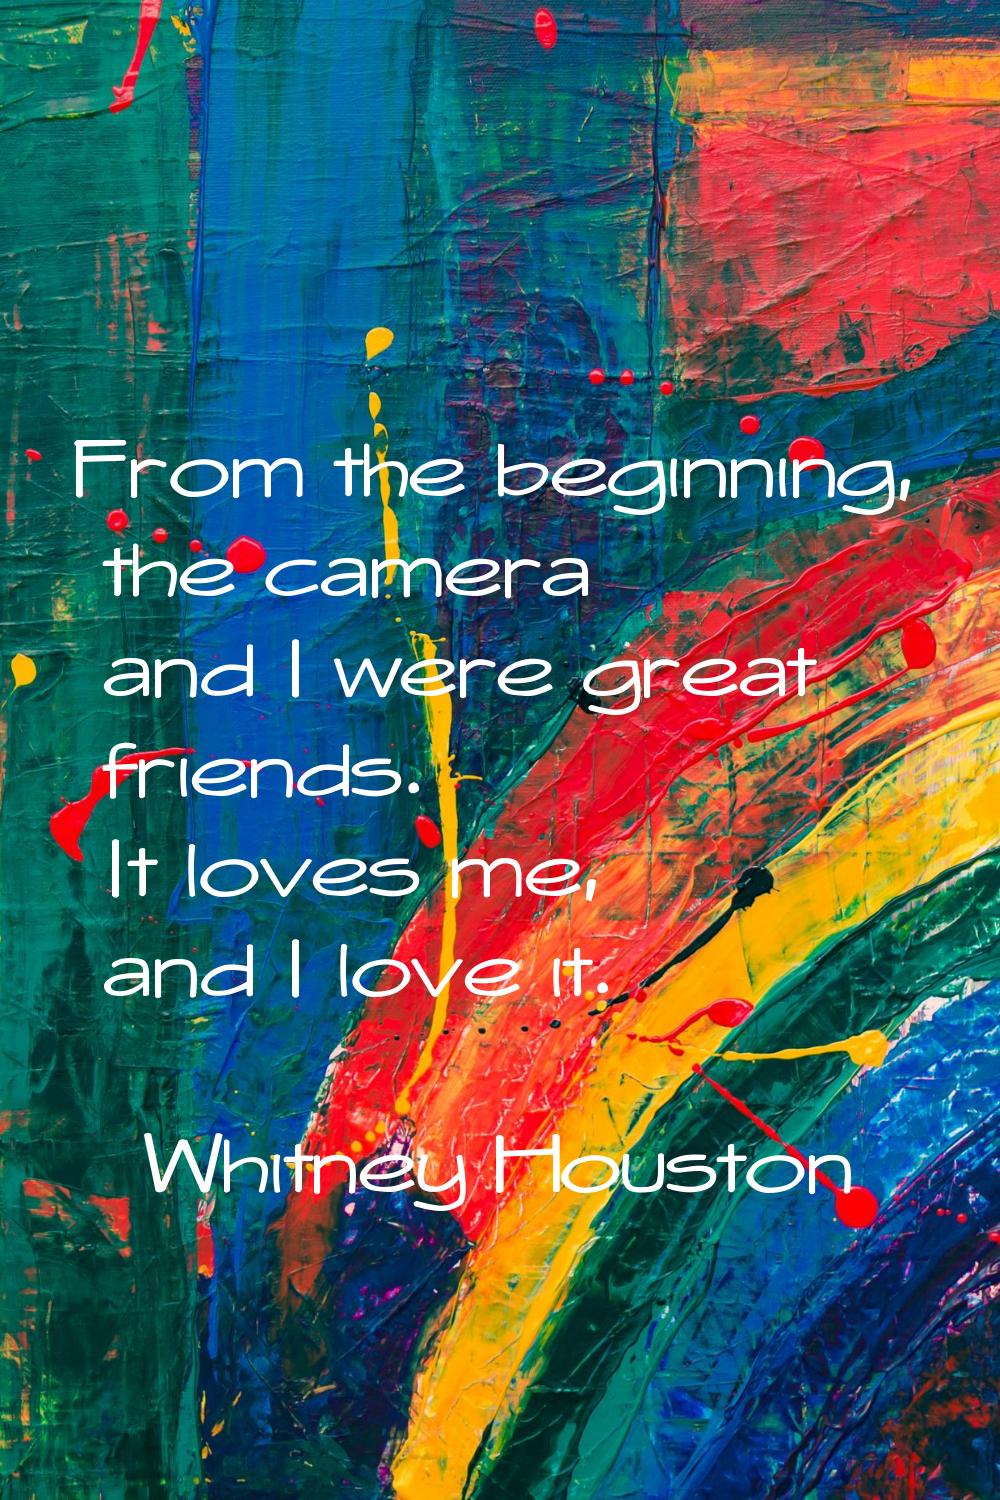 From the beginning, the camera and I were great friends. It loves me, and I love it.